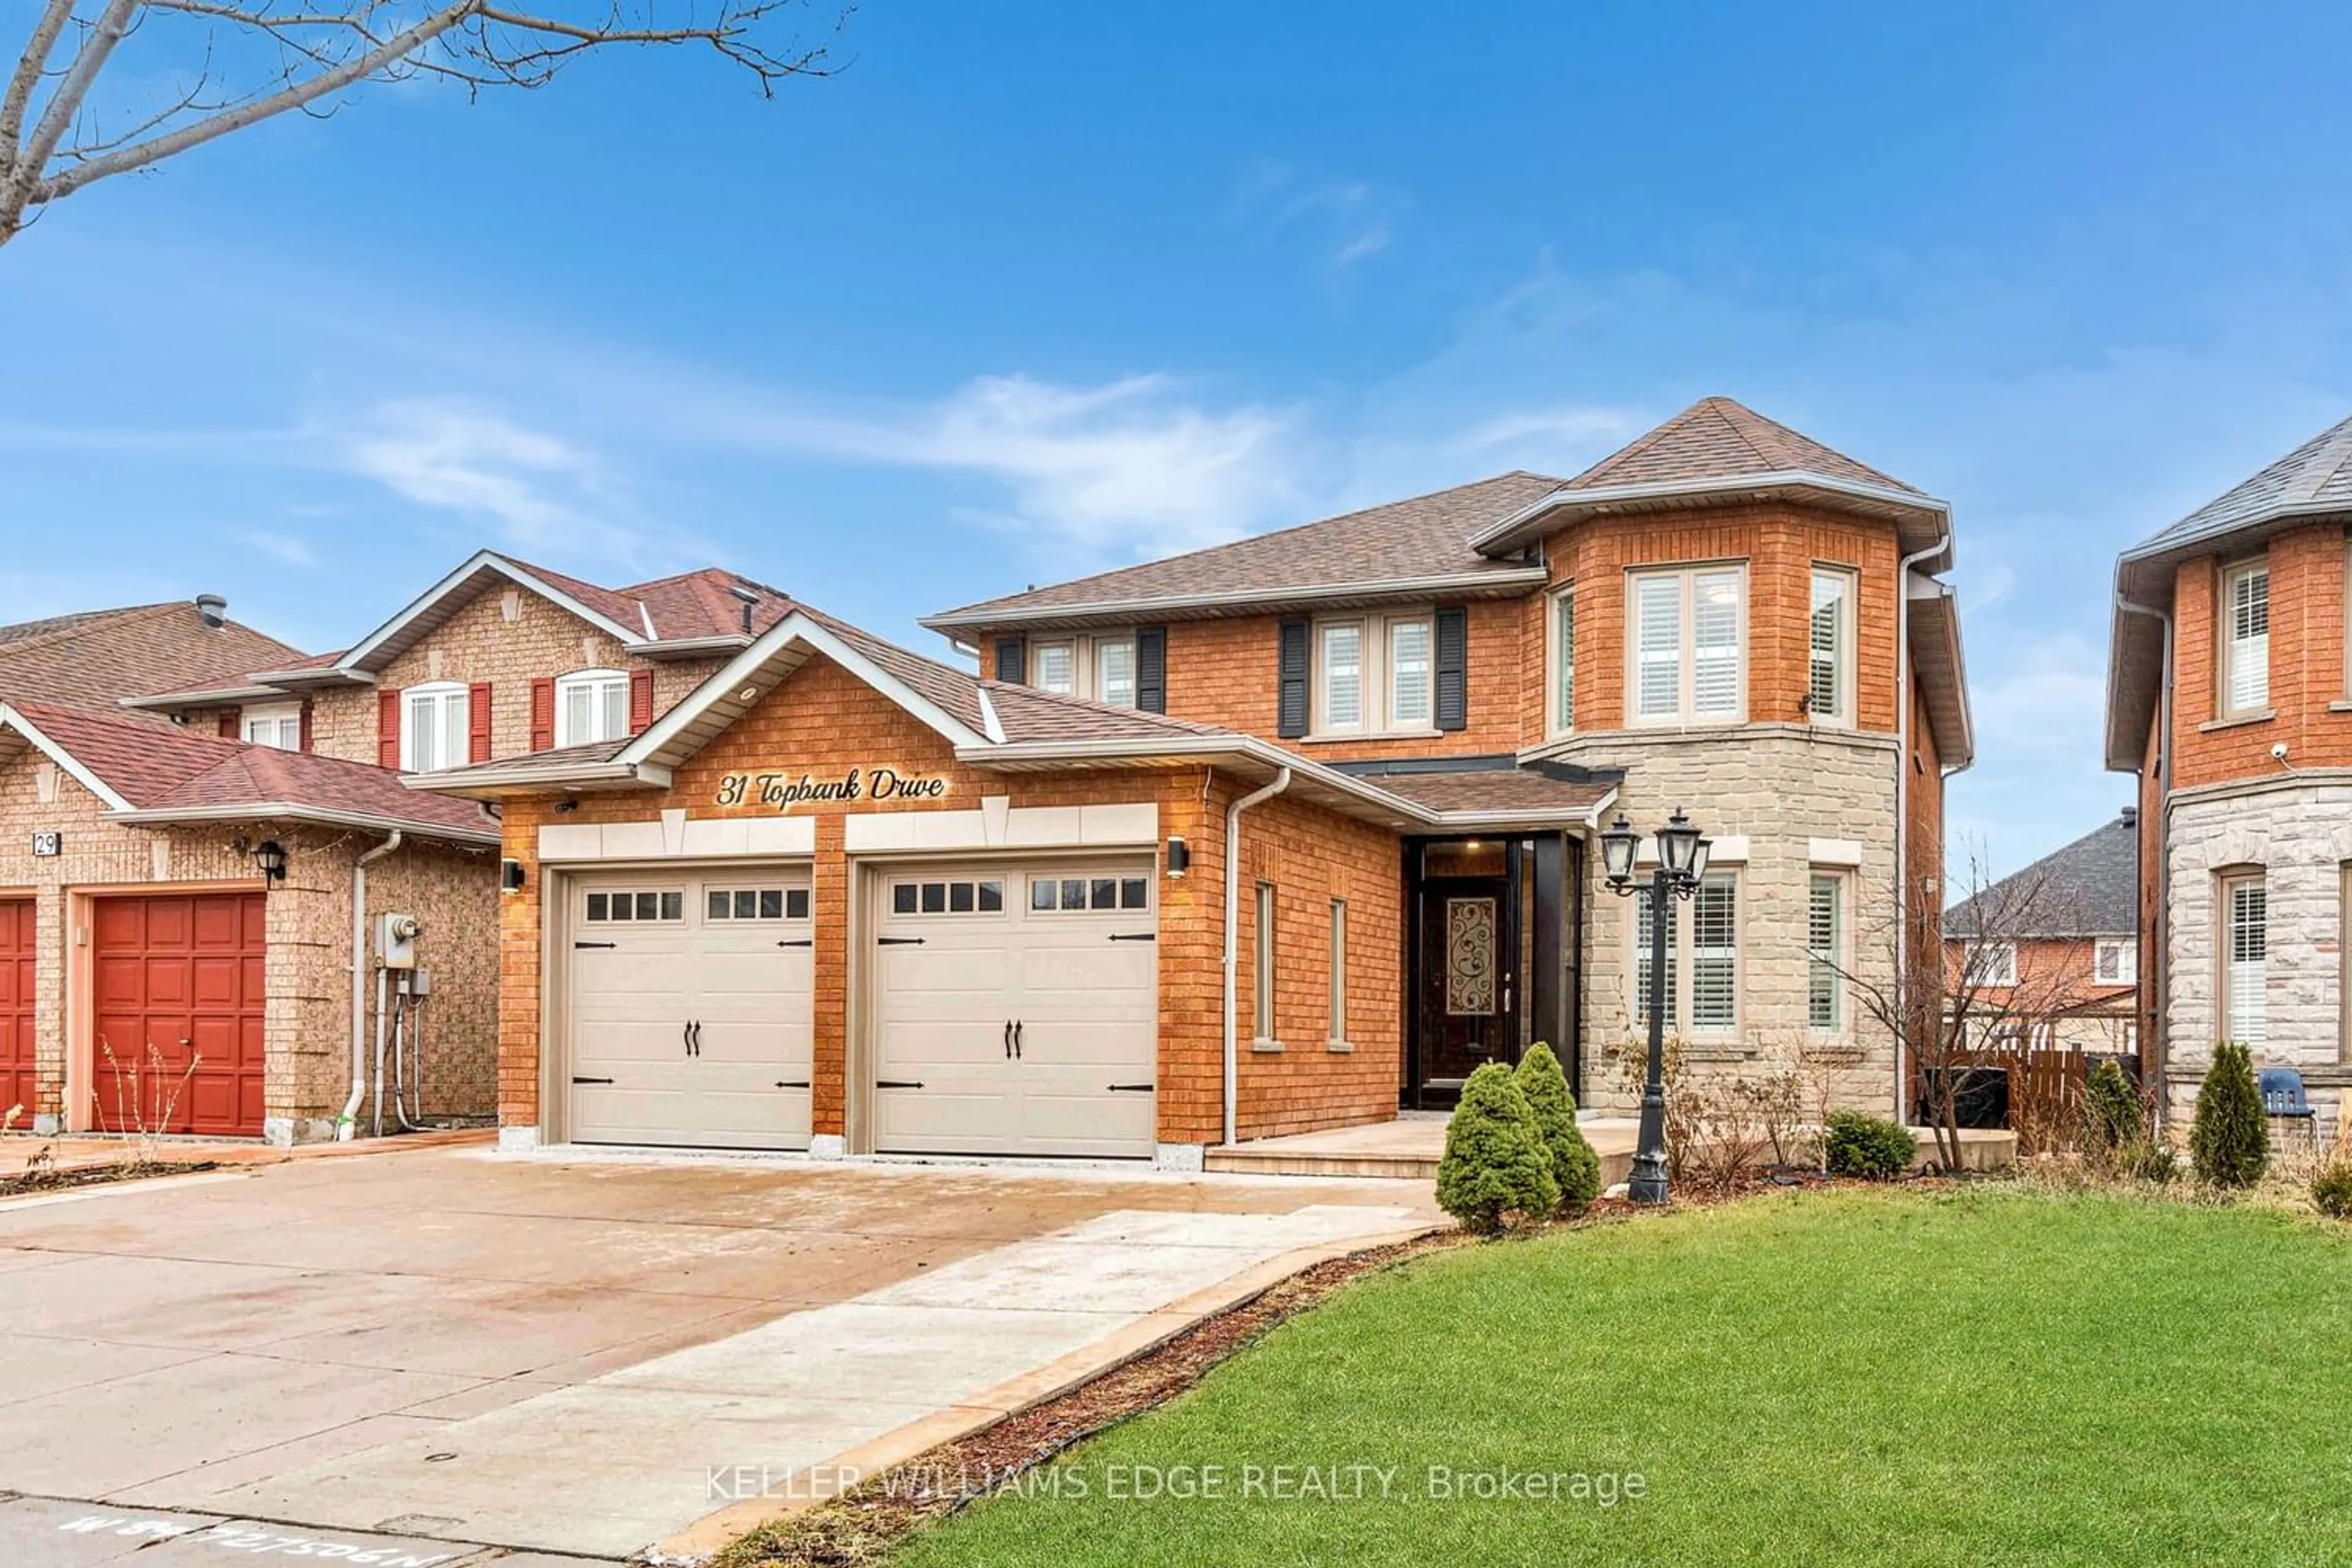 Home with brick exterior material for 31 Topbank Dr, Toronto Ontario M9W 7B8